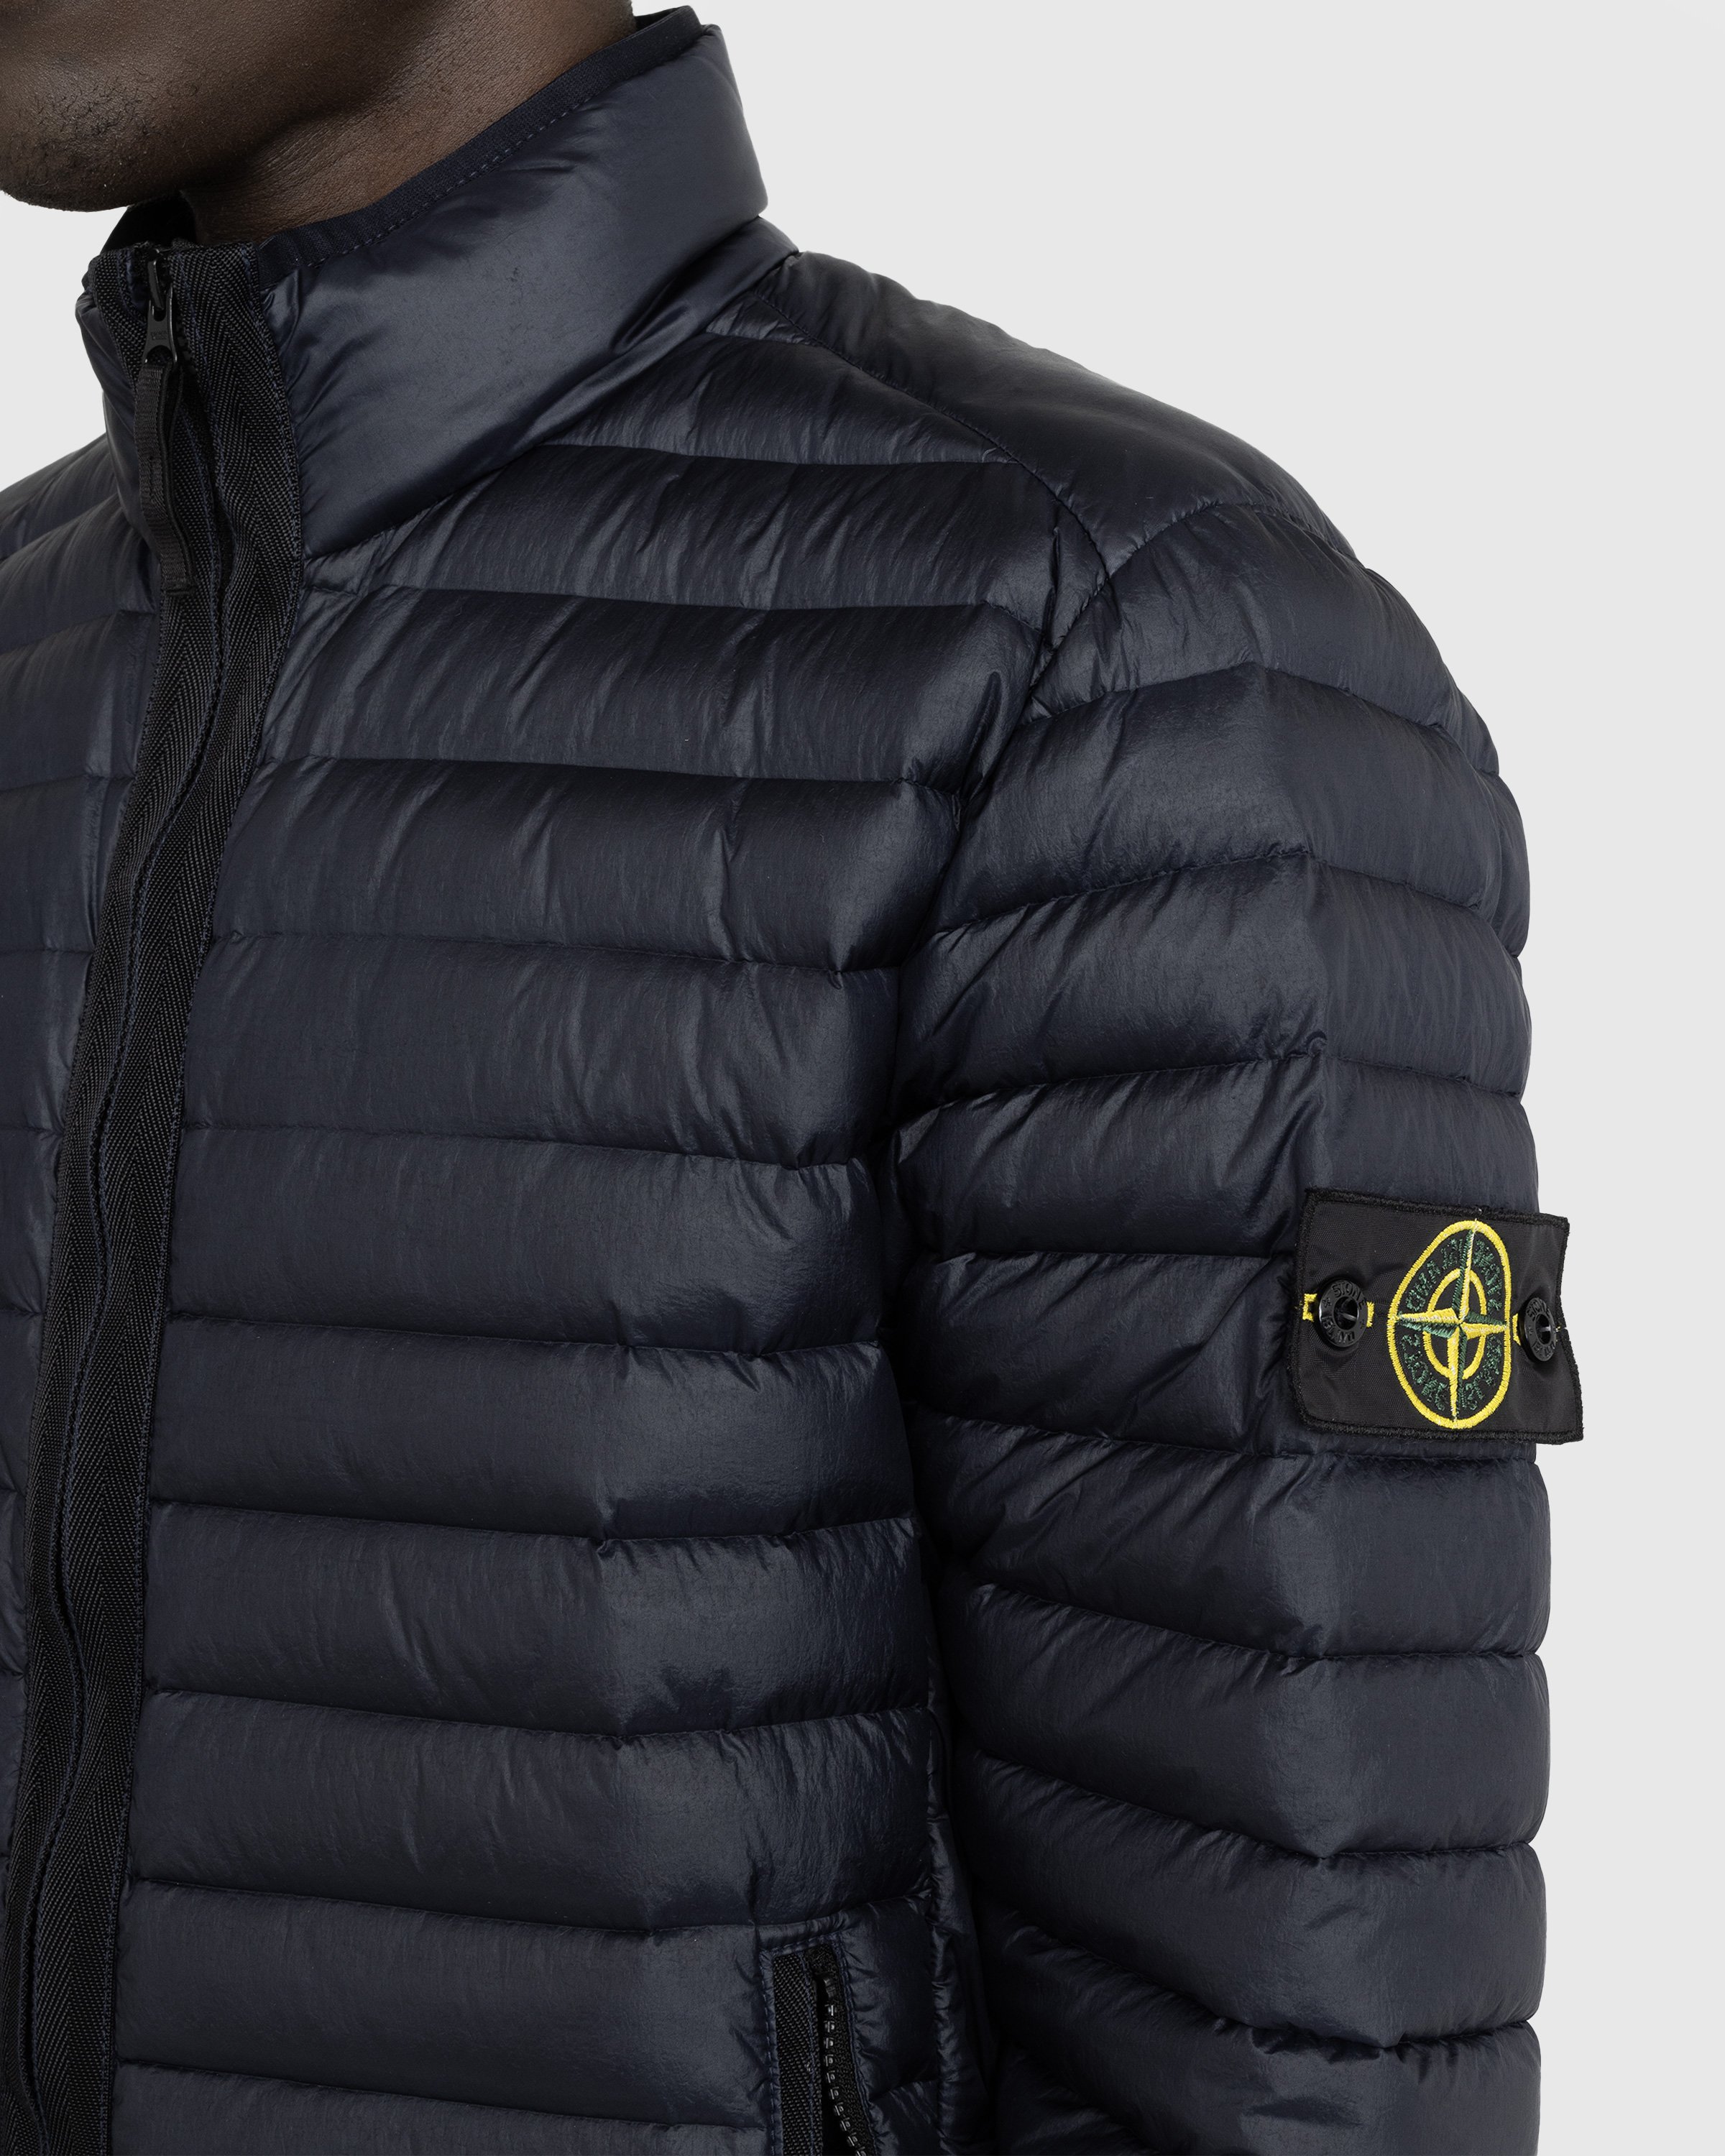 Stone Island - Packable Recycled Nylon Down Jacket Navy Blue - Clothing - Blue - Image 4